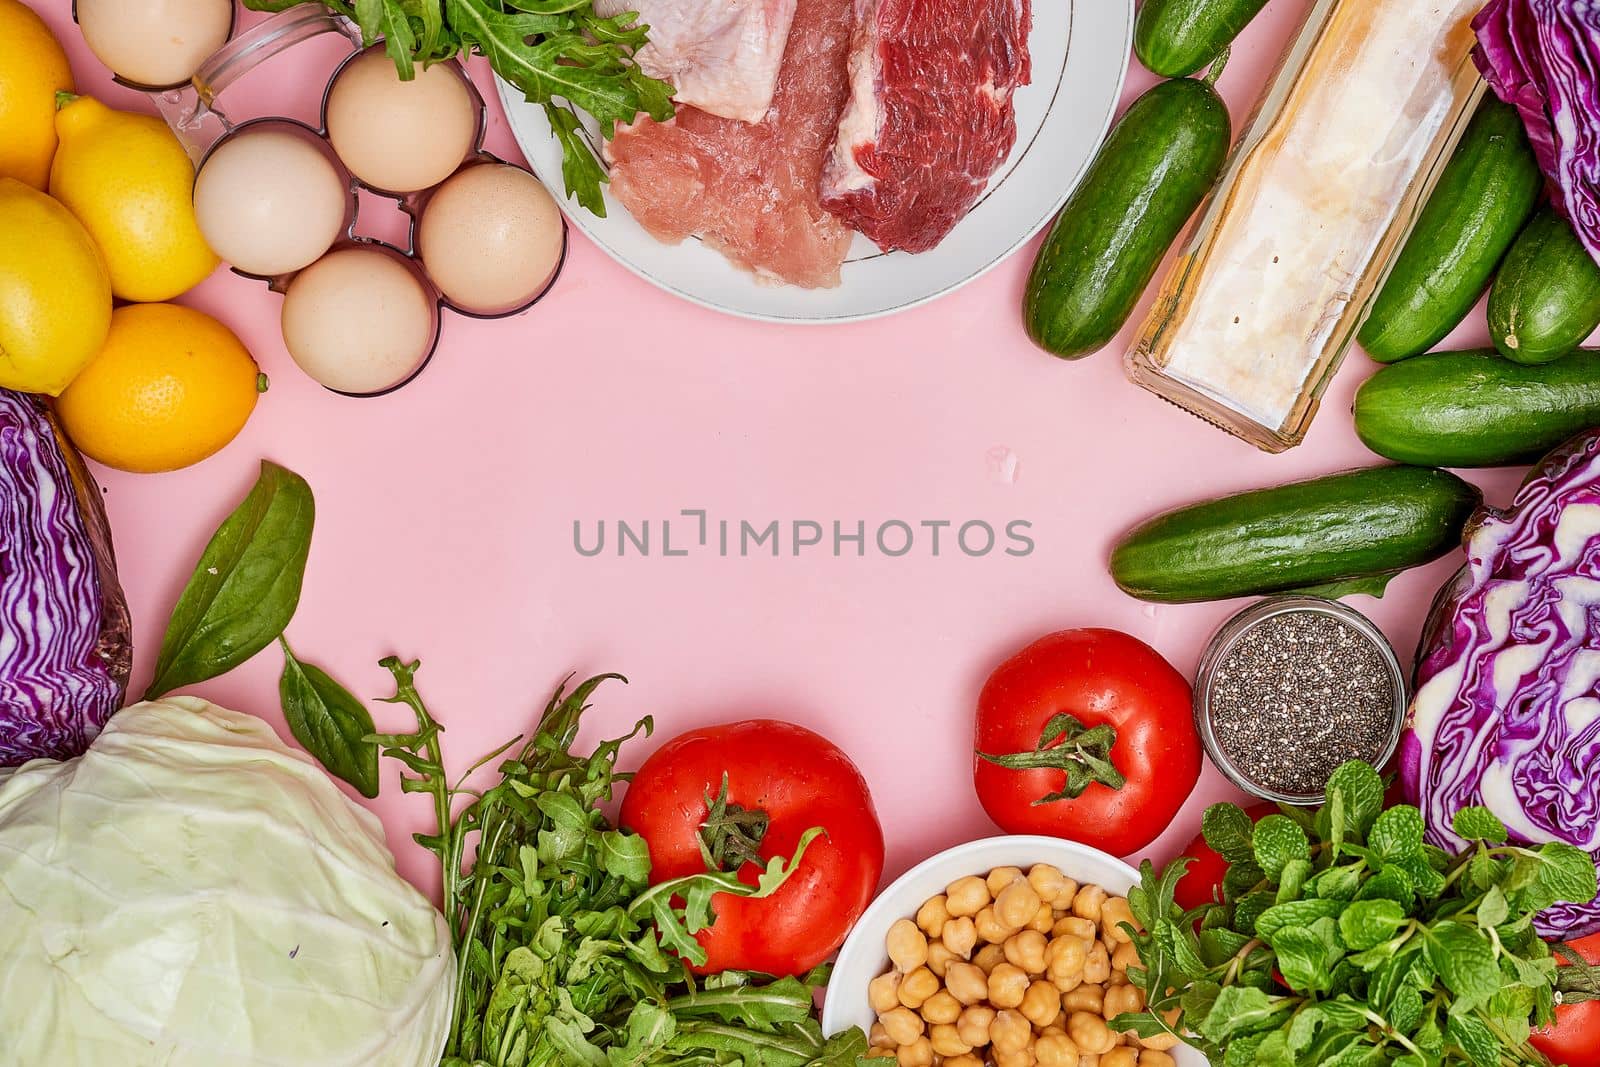 an assortment of vegetables and meats on a pink background by golibtolibov